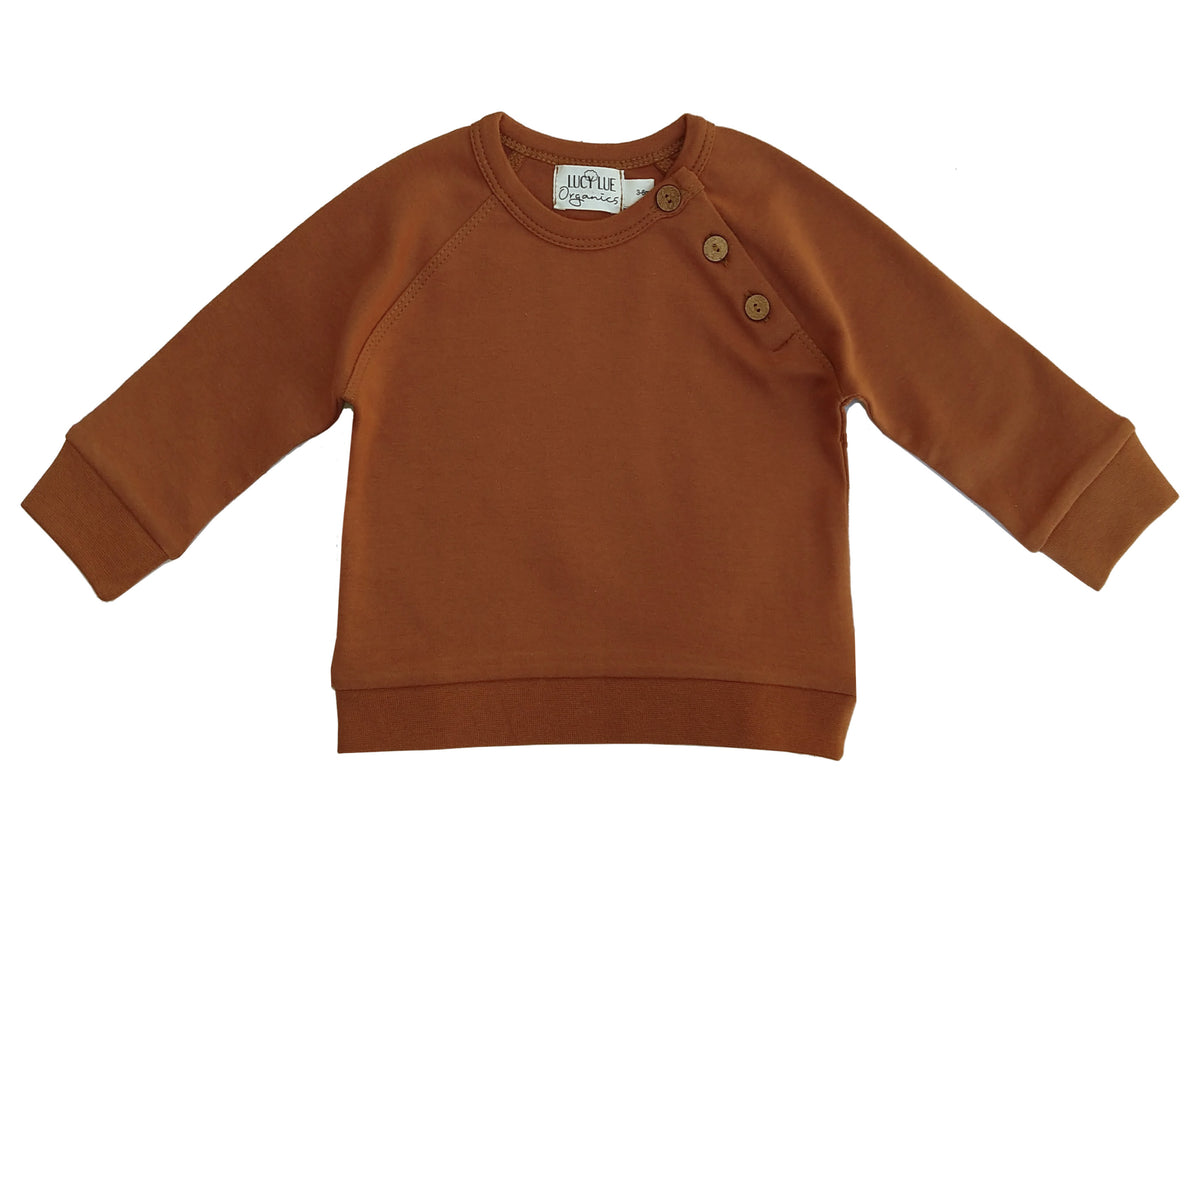 Organic pullover shirt. Baby boy pullover. Long Sleeve baby boy winter top. Lucy Lue Organics. Gender neutral baby clothes